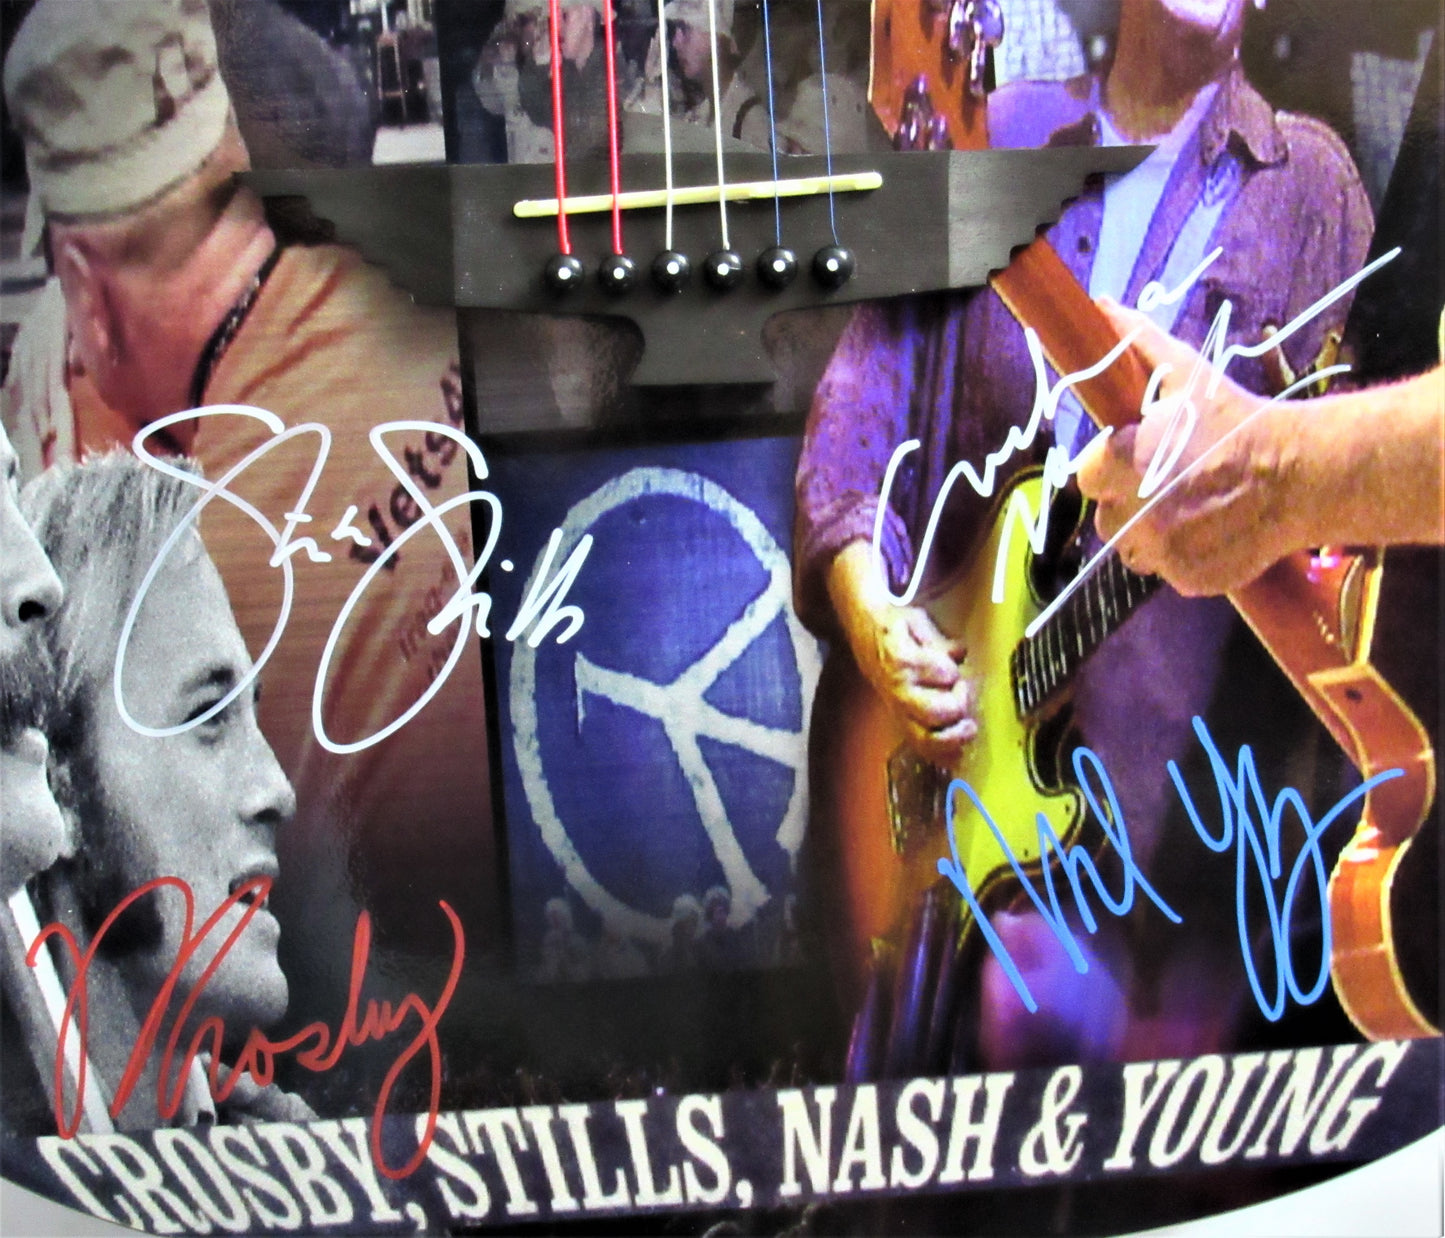 Crosby Stills Nash & Young Autographed Guitar - Zion Graphic Collectibles